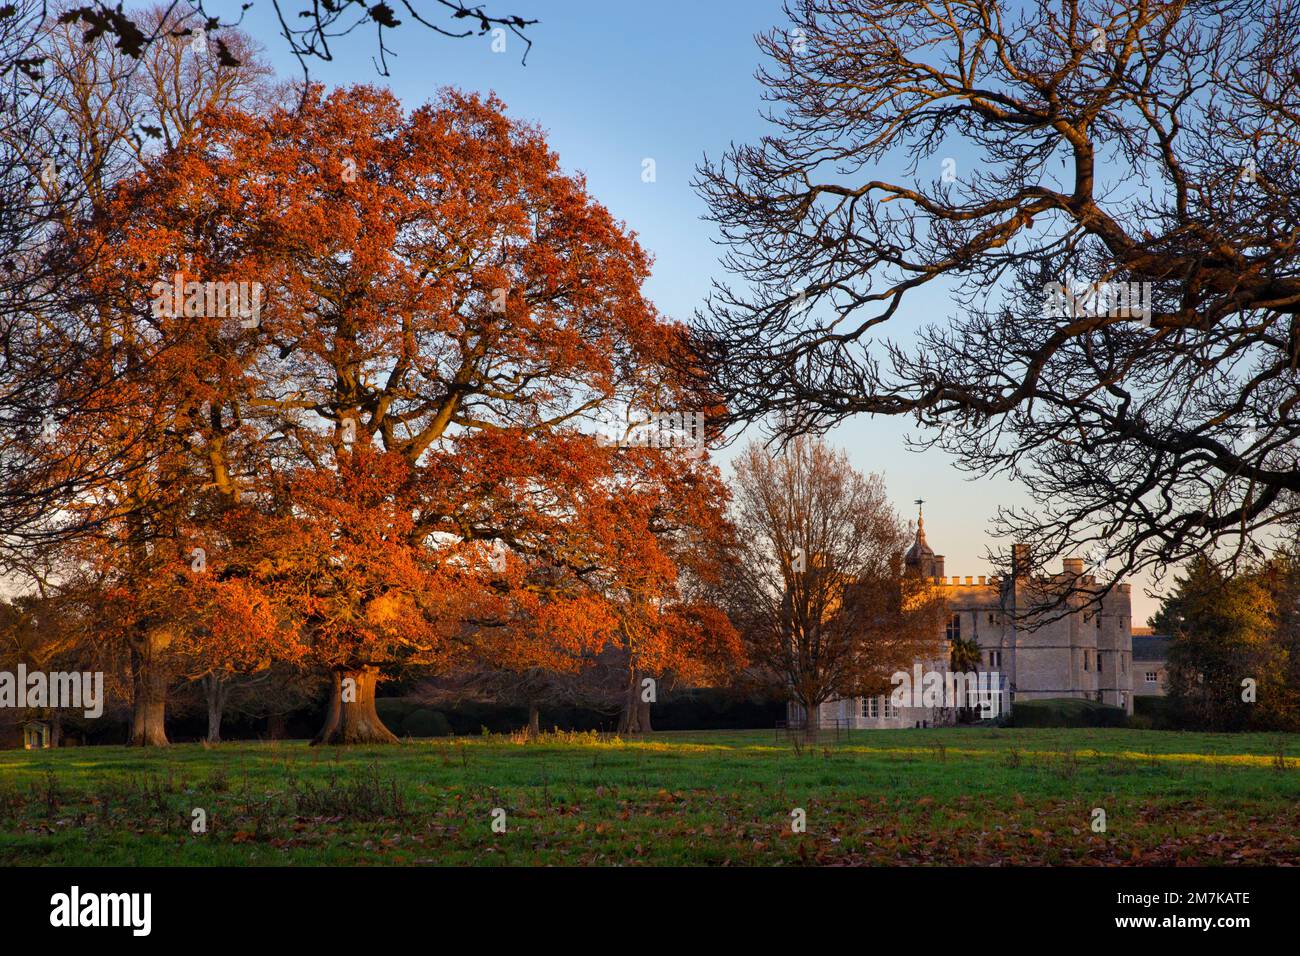 Rousham House and grounds in autumn colour, oxfordshire,England,Europe Stock Photo